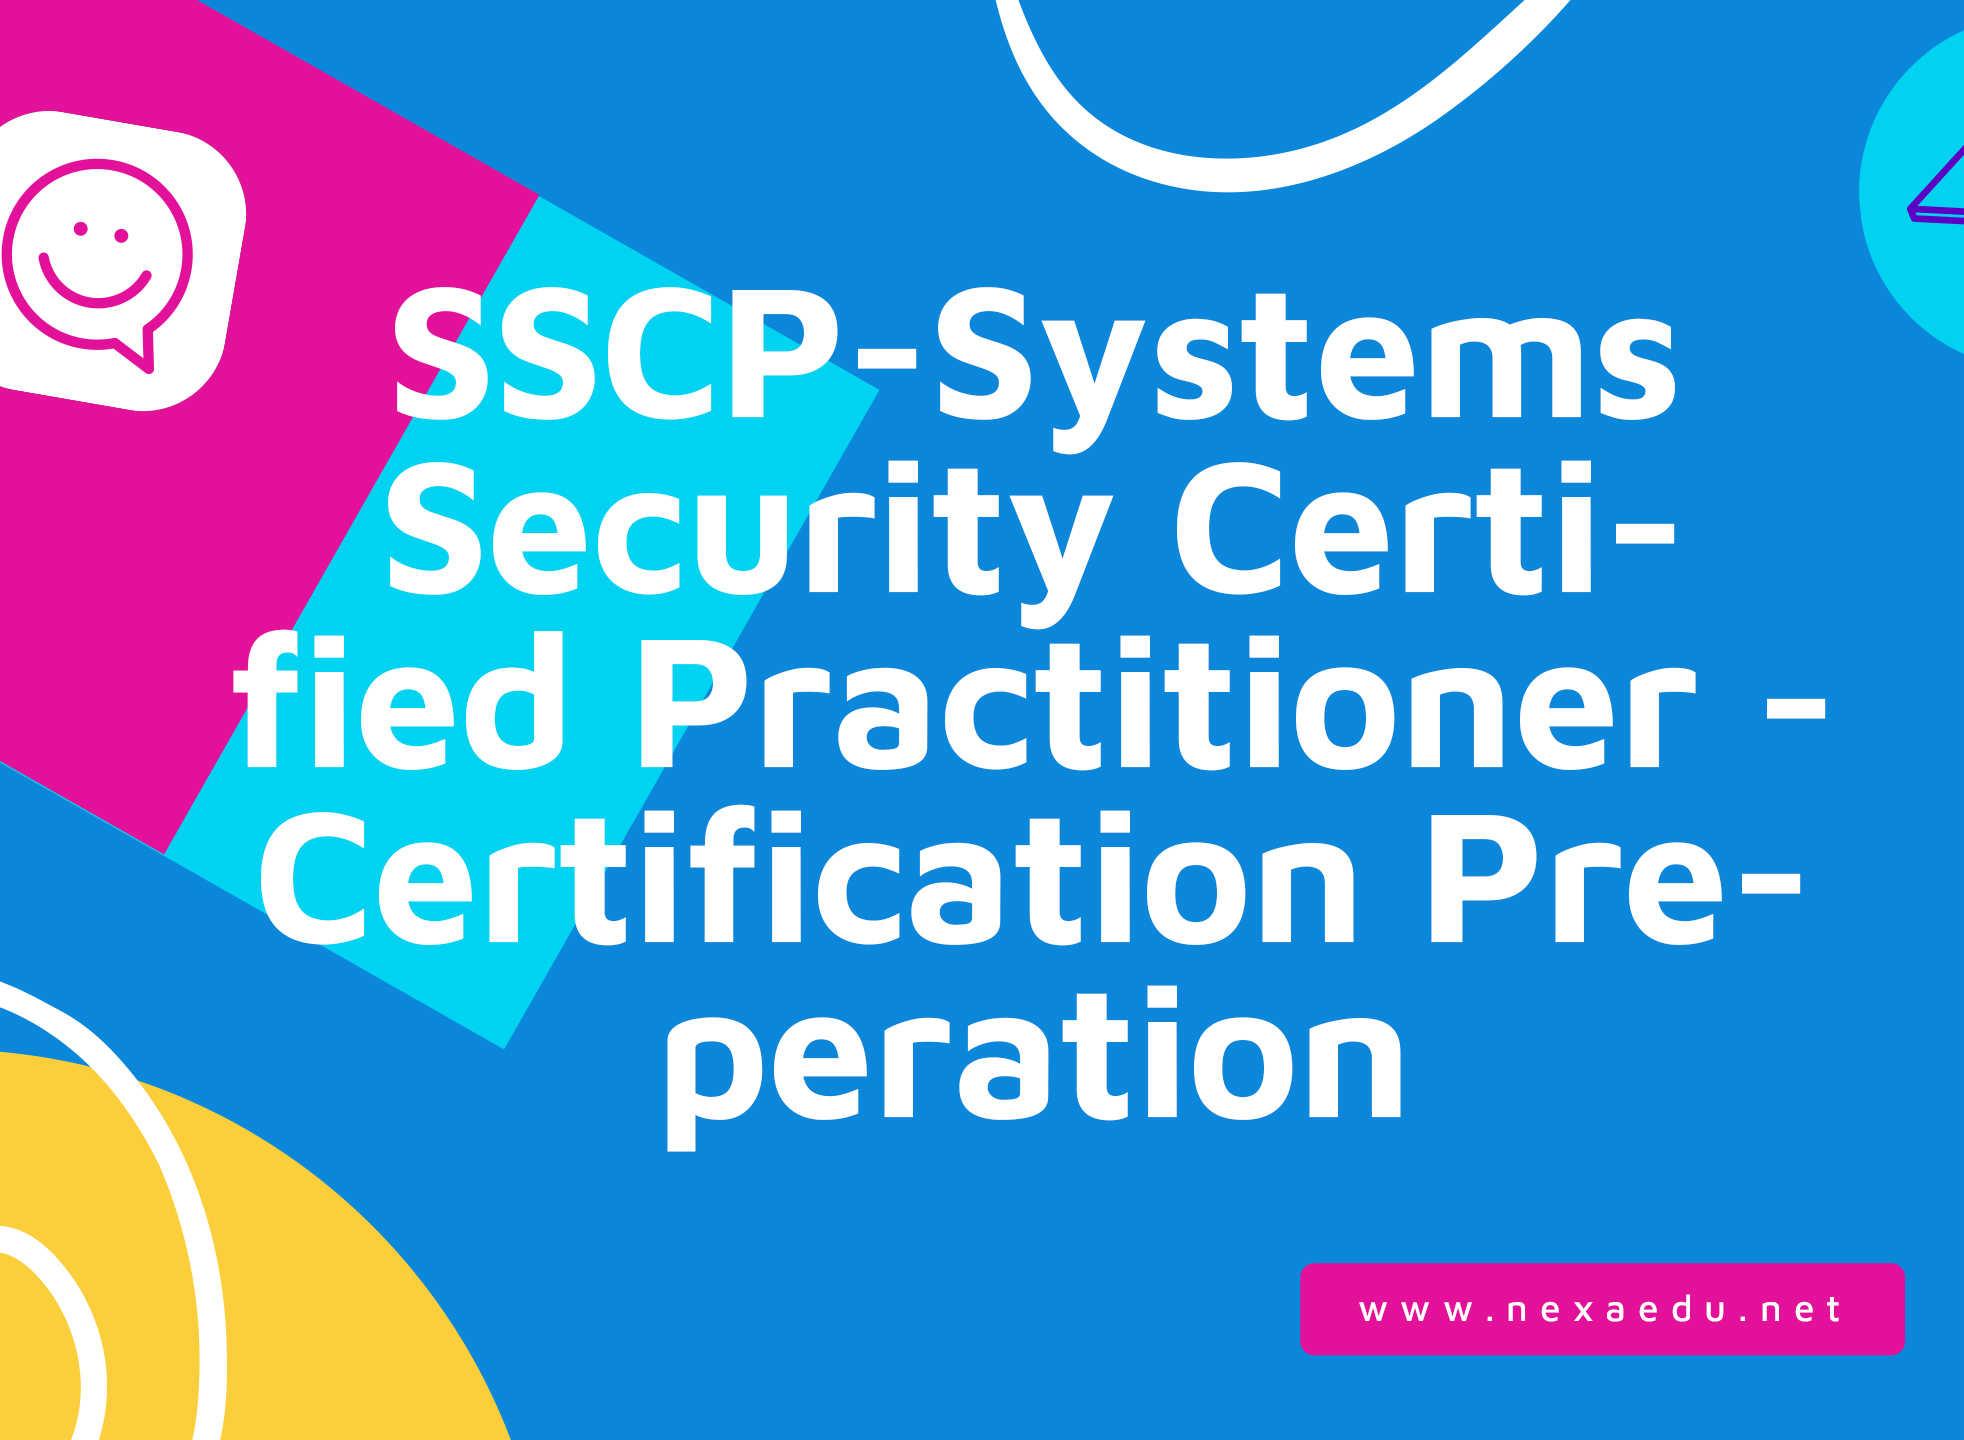 SSCP-Systems Security Certified Practitioner - Certification Preperation